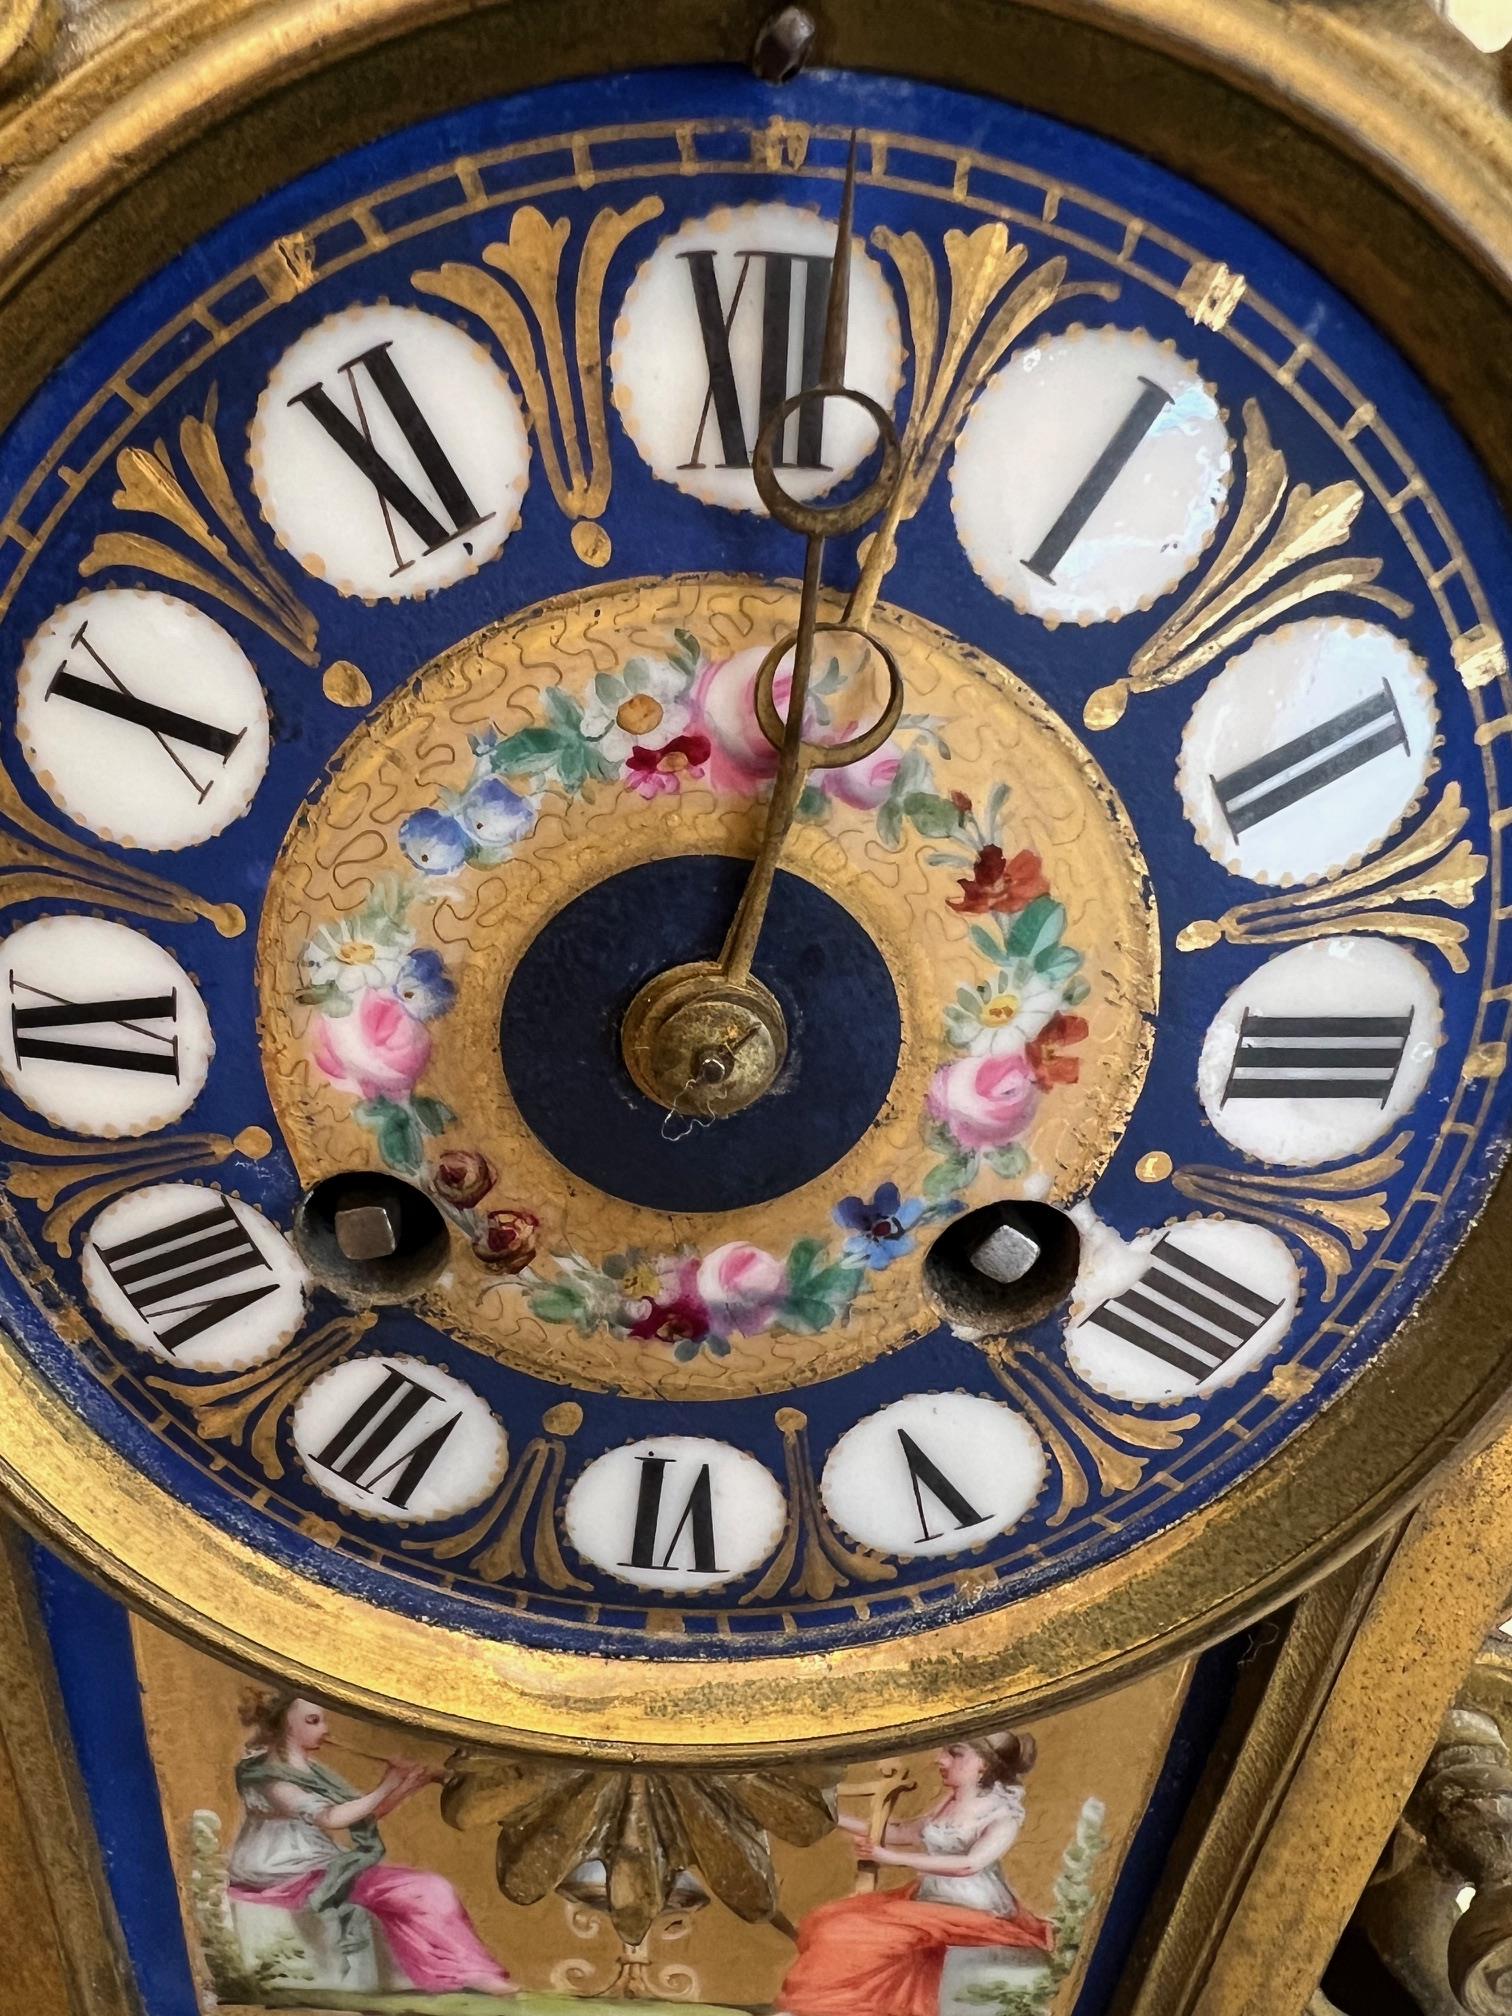 A LATE 19TH CENTURY FRENCH PORCELAIN MOUTED ORMOLU MANTEL CLOCK - Image 4 of 6